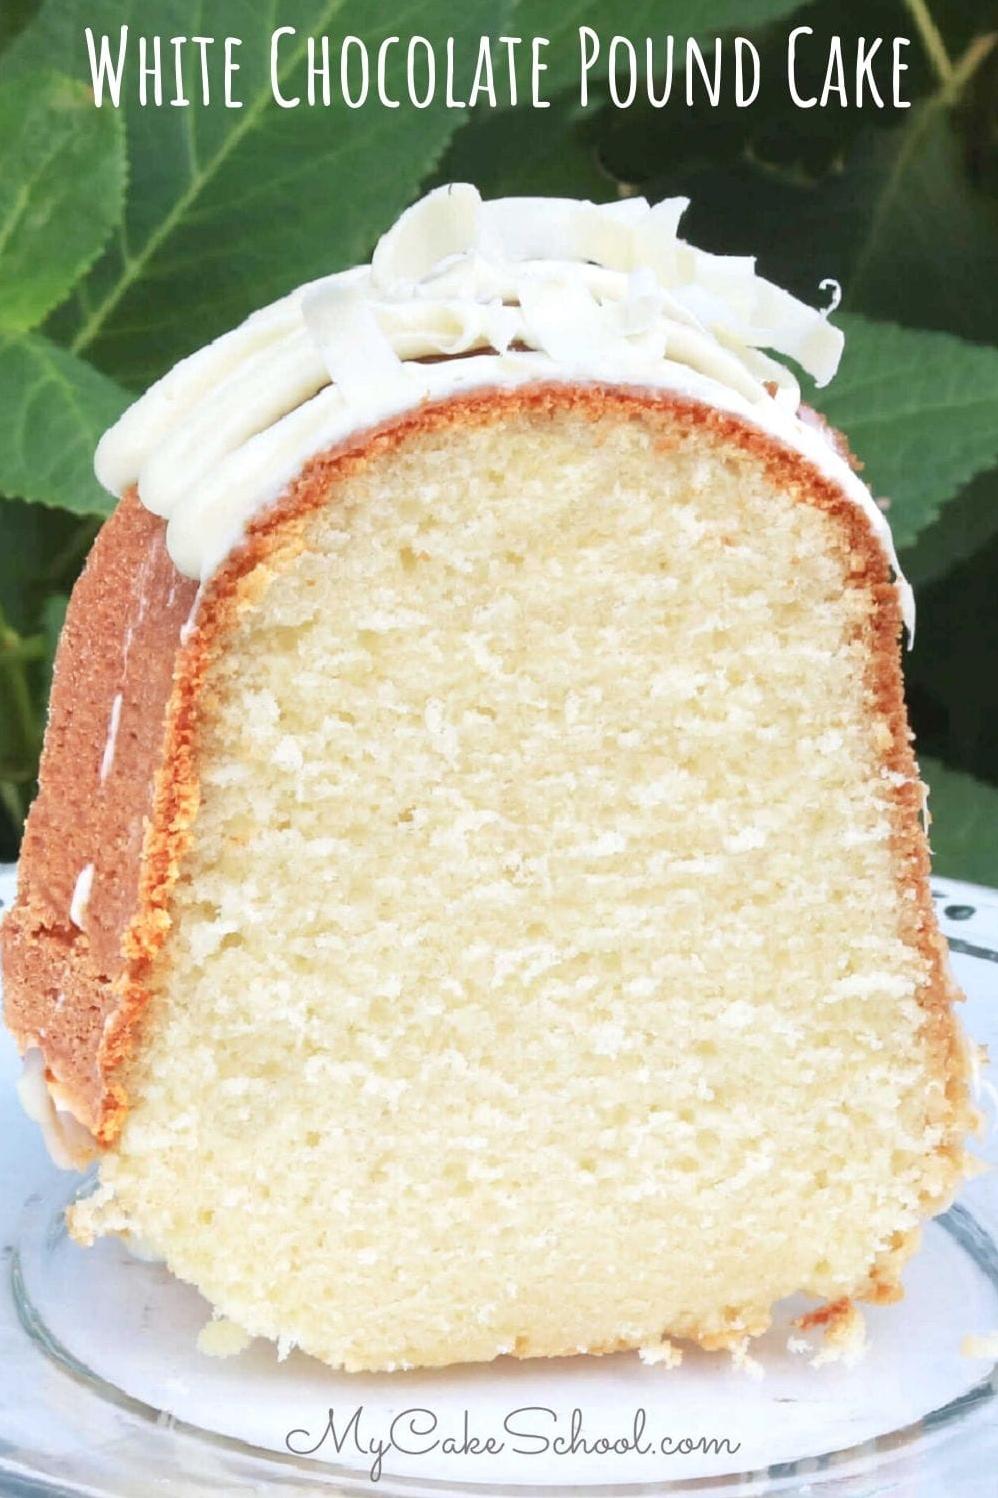  Moist, fluffy, and absolutely divine - this white chocolate pound cake is a must-try!